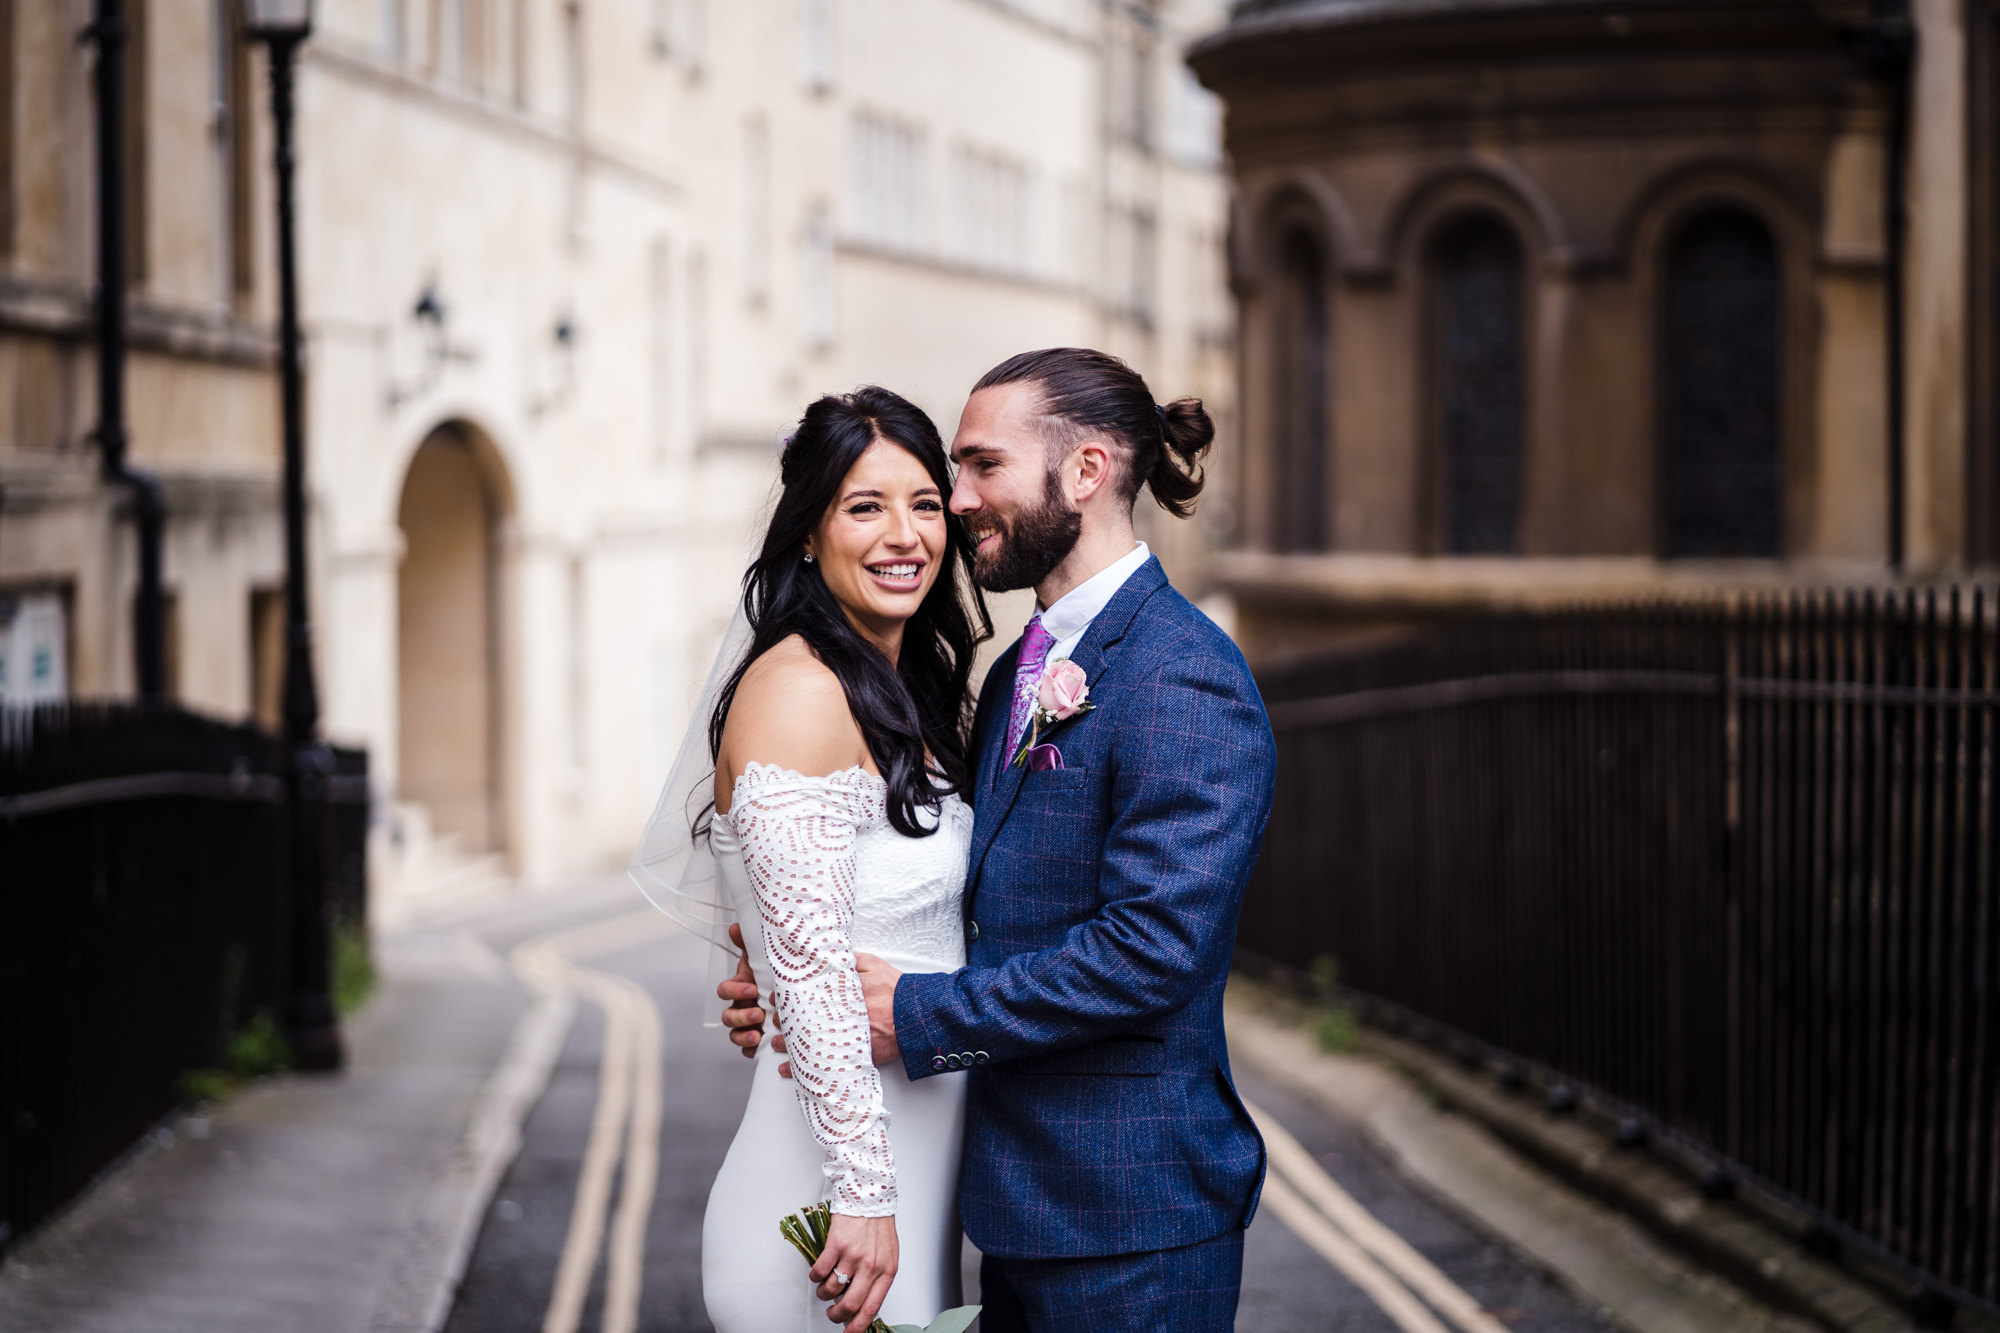 bride looks at the camera smiling as groom kisses cheek during couple photo shoot in bath